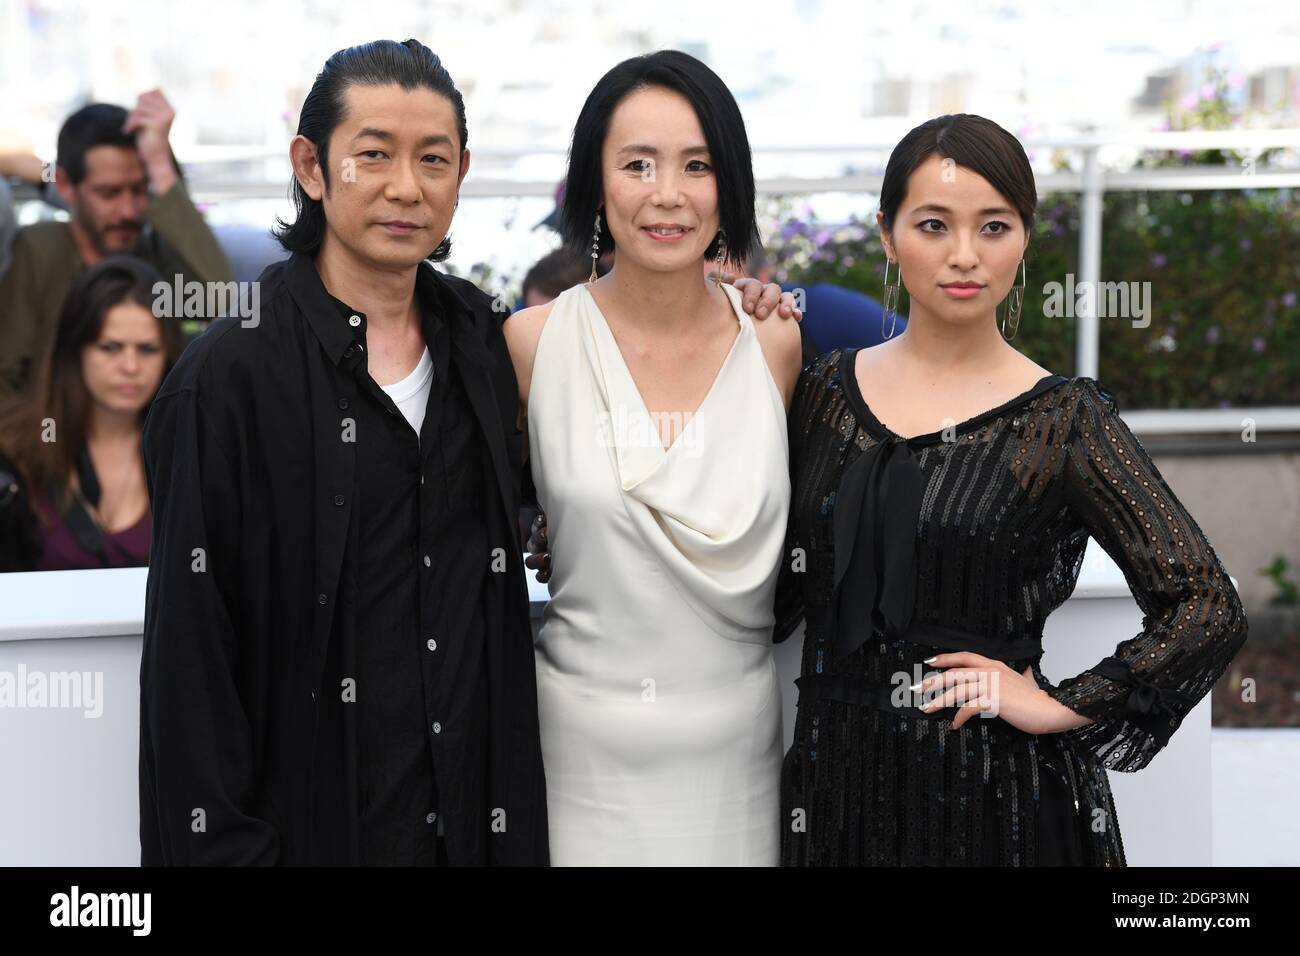 Masatoshi Nagase, Naomi Kawase and Ayame Misaki attending the Radiance photocall as part of the 70th Cannes Film Festival Stock Photo